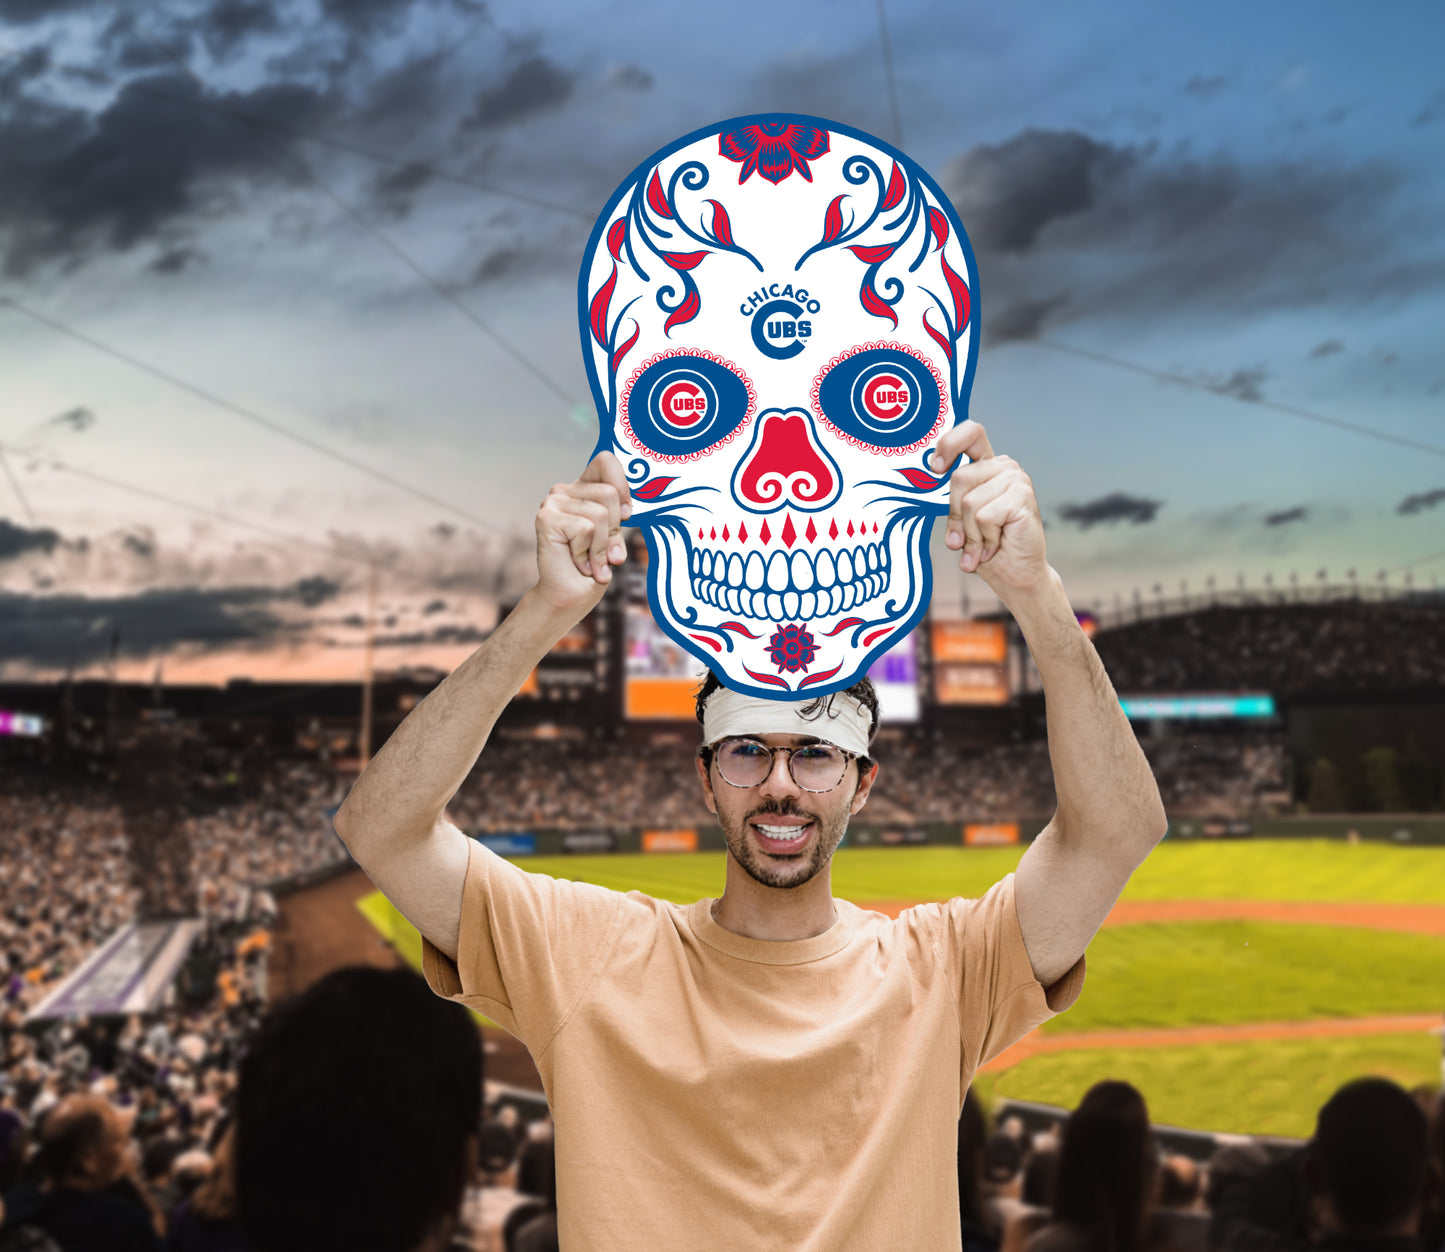 Chicago Cubs: Skull Foam Core Cutout - Officially Licensed MLB Big Head